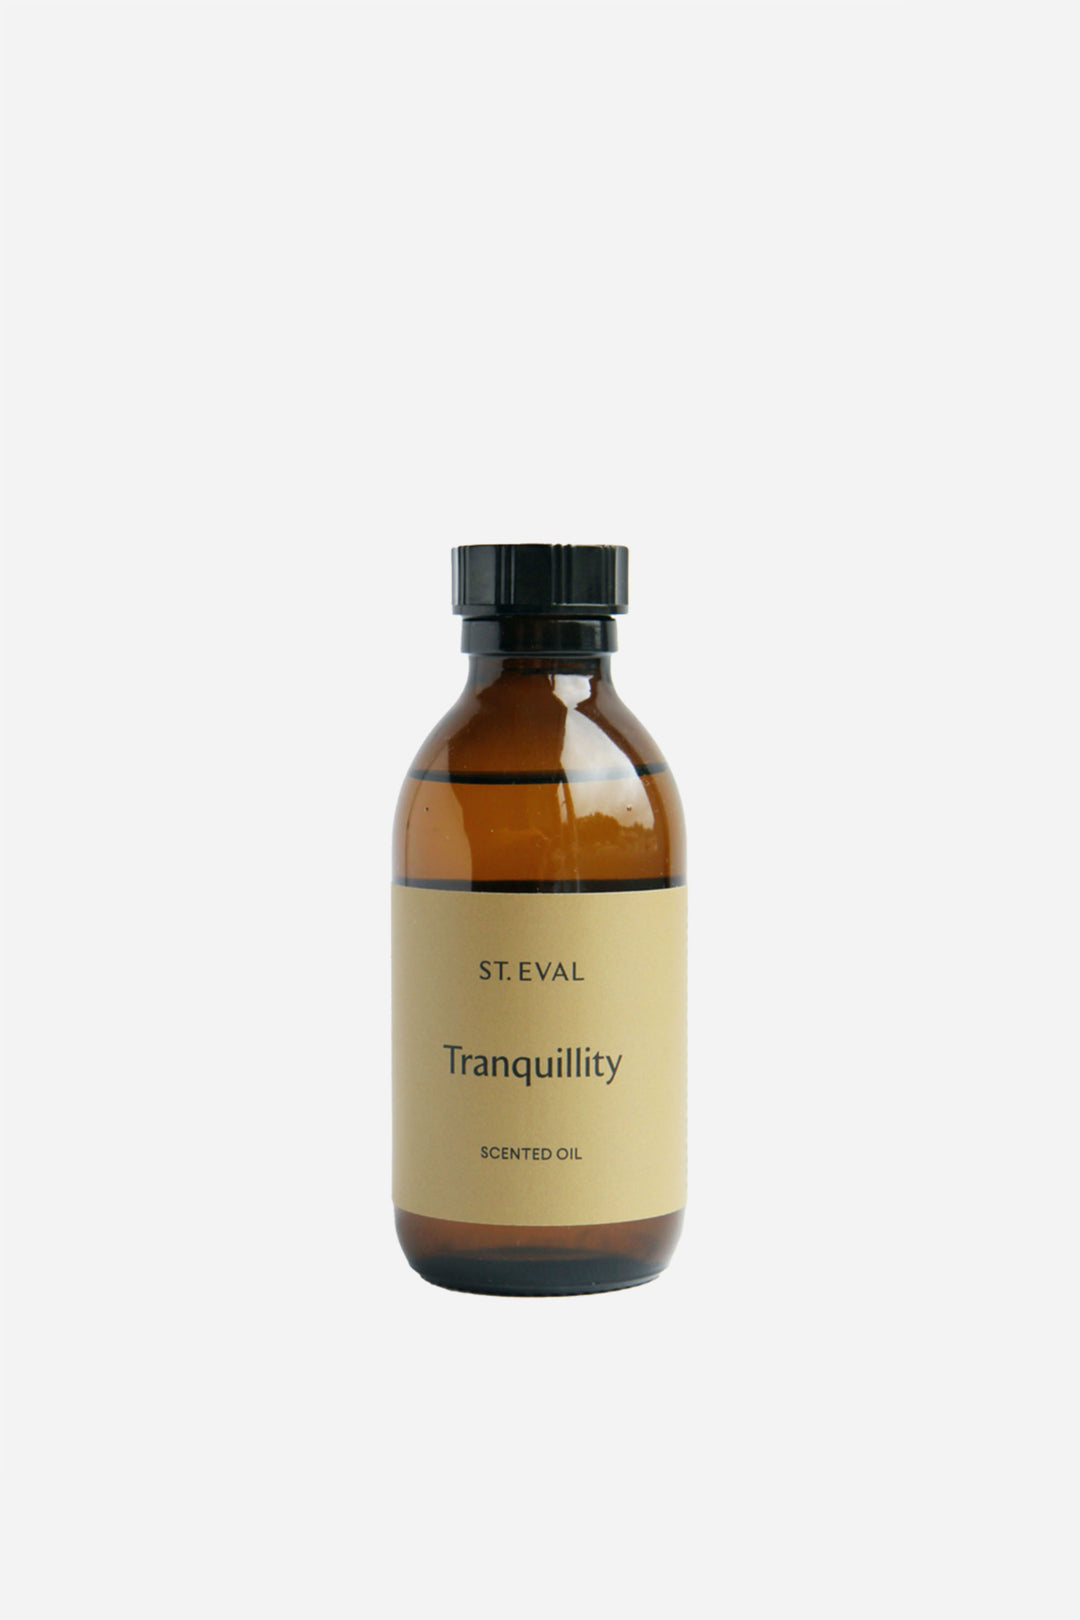 St Eval Diffuser Oil / Tranquility - Domestic Science Home